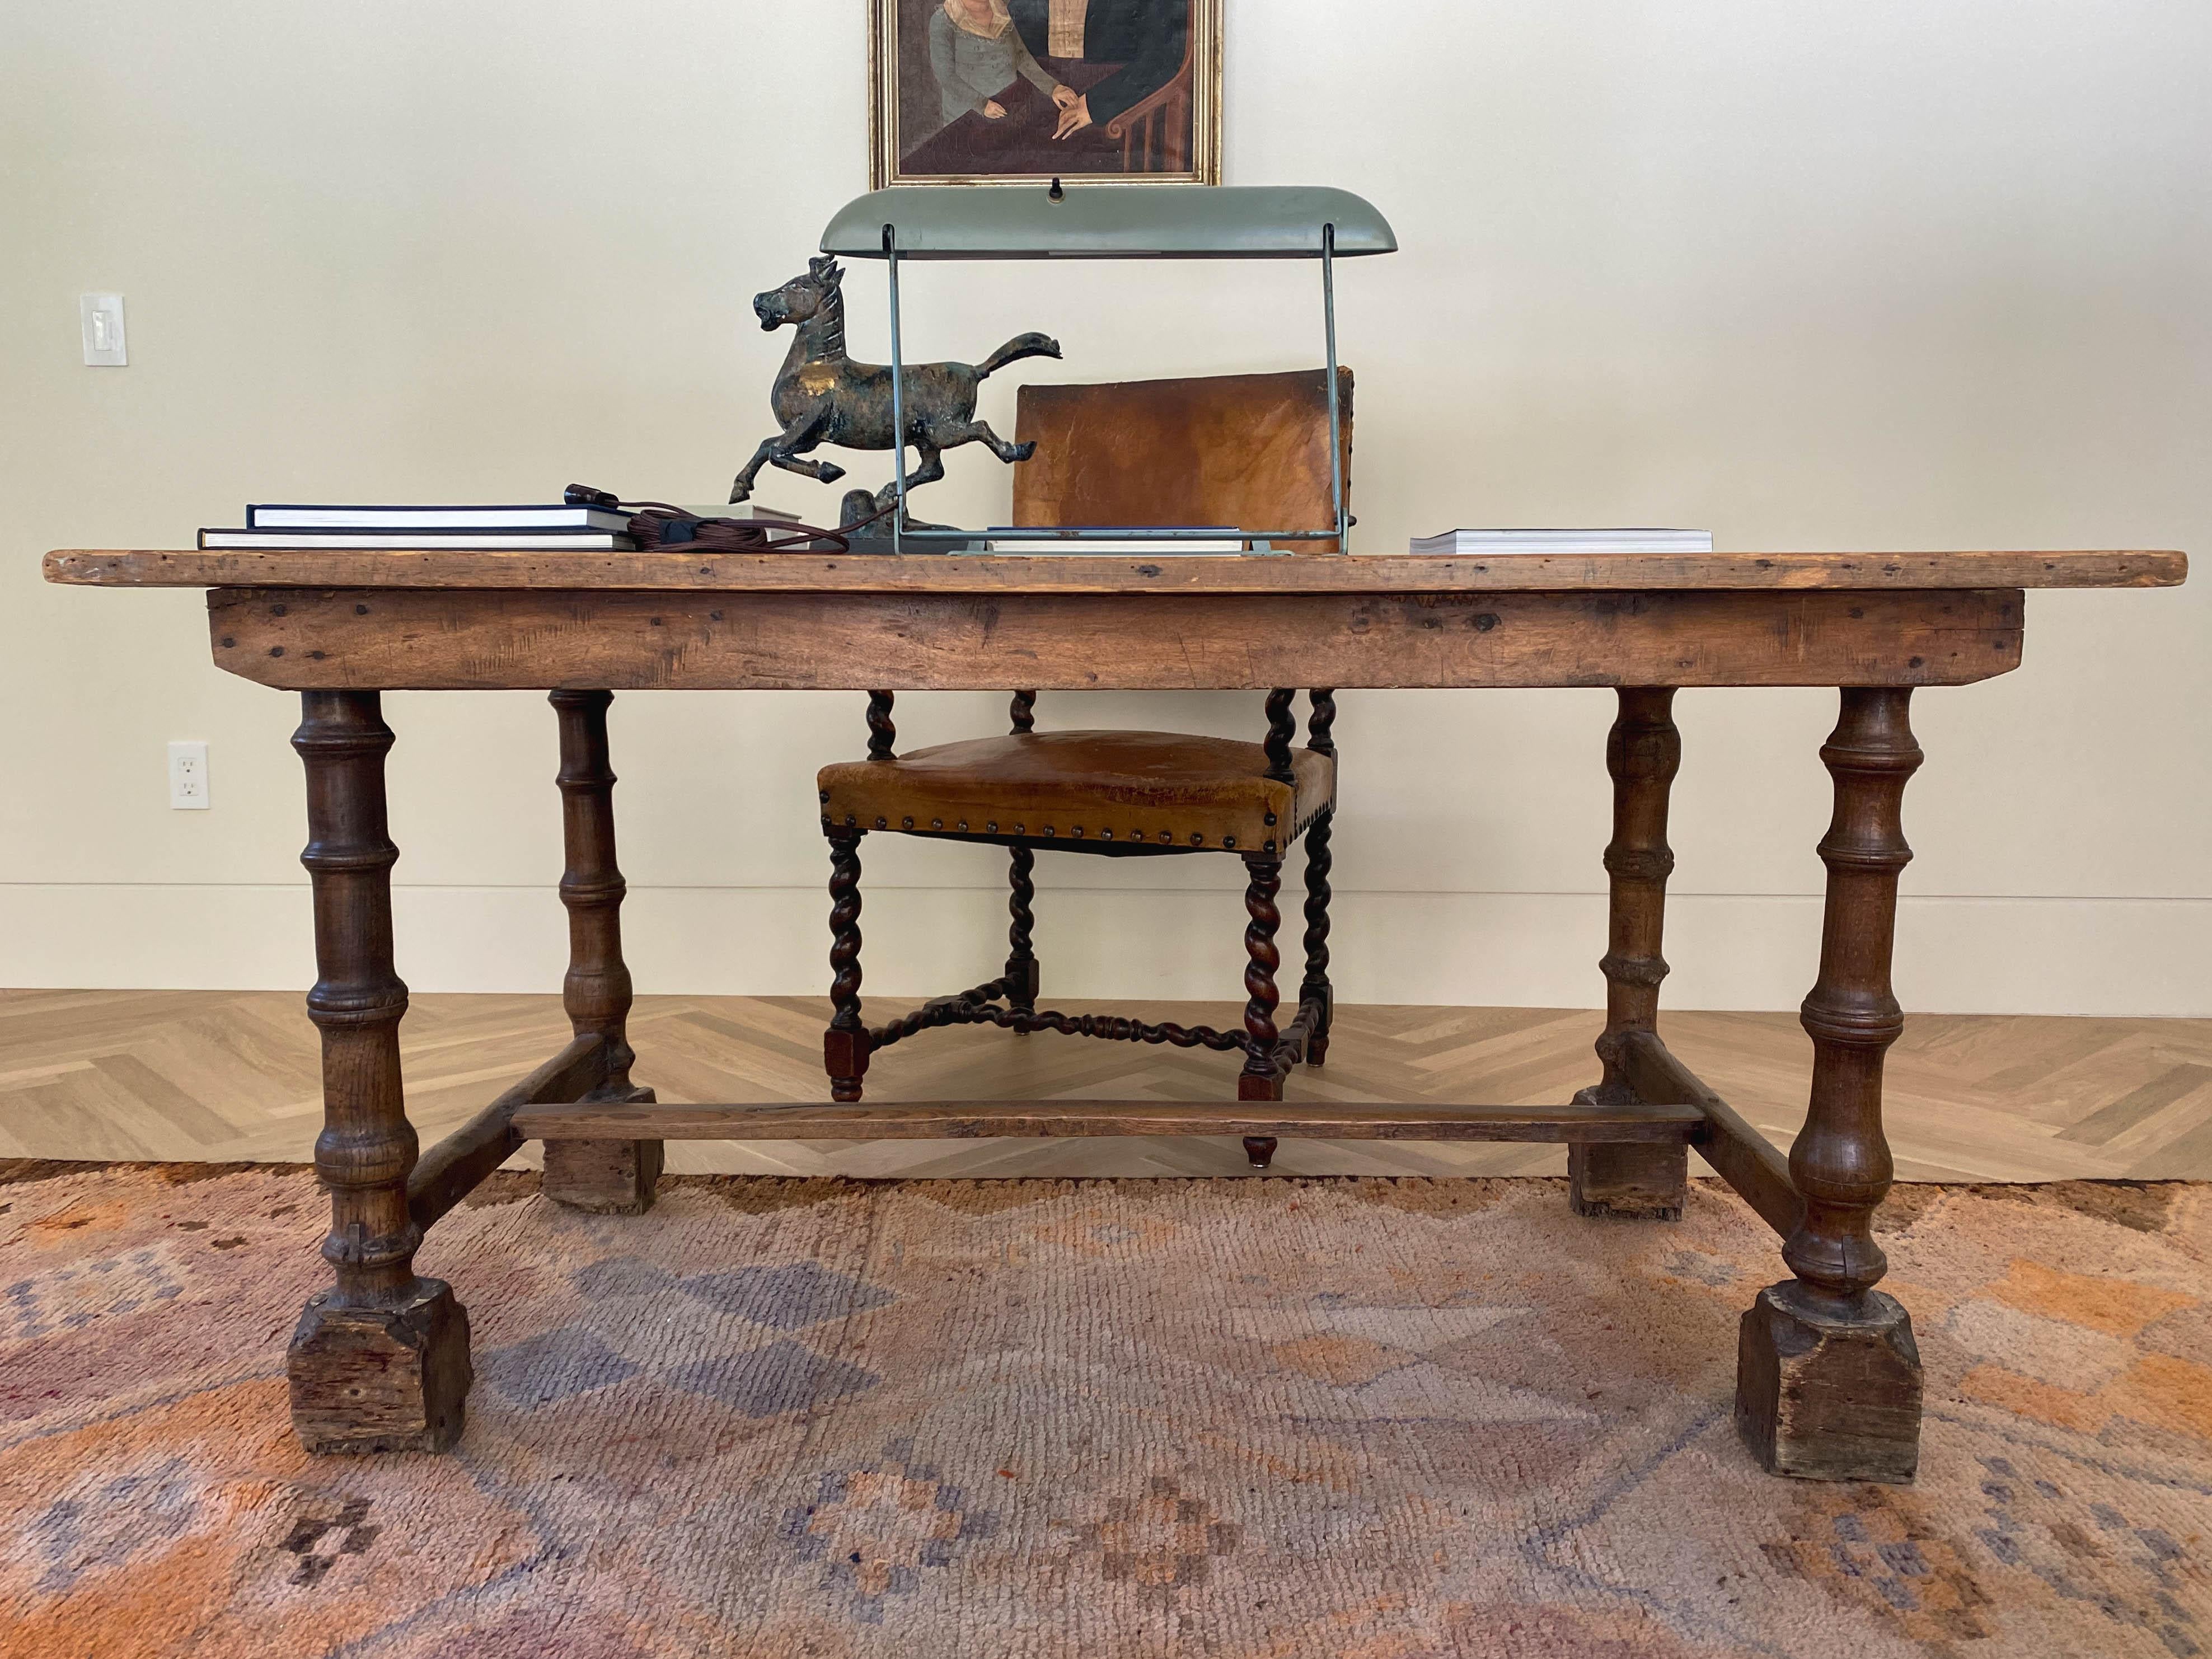 Rustic 19th Century Pine Table with Robust Leg Detailing In Excellent Condition For Sale In West Hollywood, CA